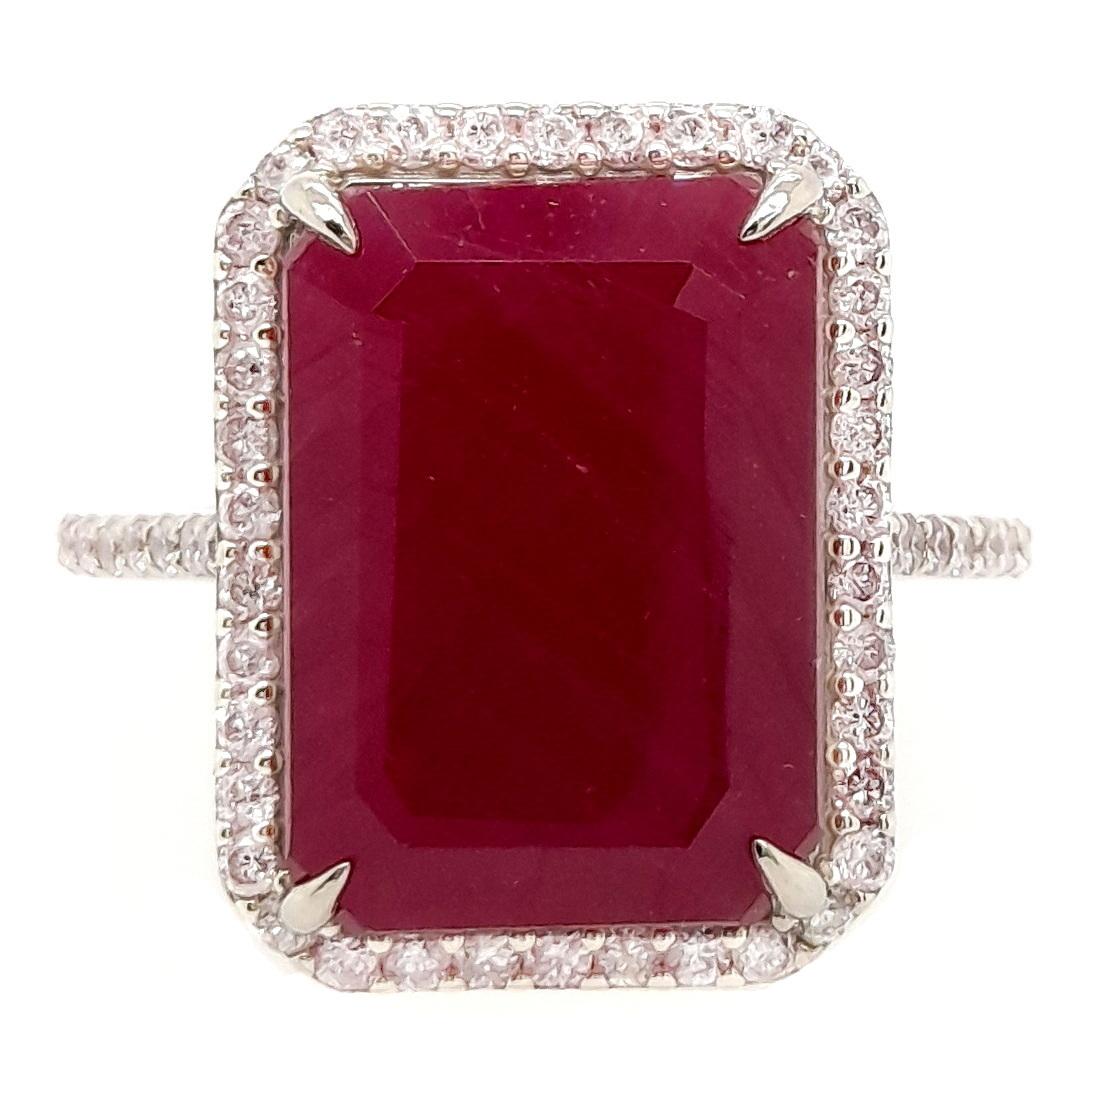 Behold the majestic allure of a 9.74 carat untreated ruby, harmoniously complemented by round brilliant natural diamonds and adorned by a 14K white gold ring. Elevate your collection with this epitome of enduring elegance and opulent beauty, created